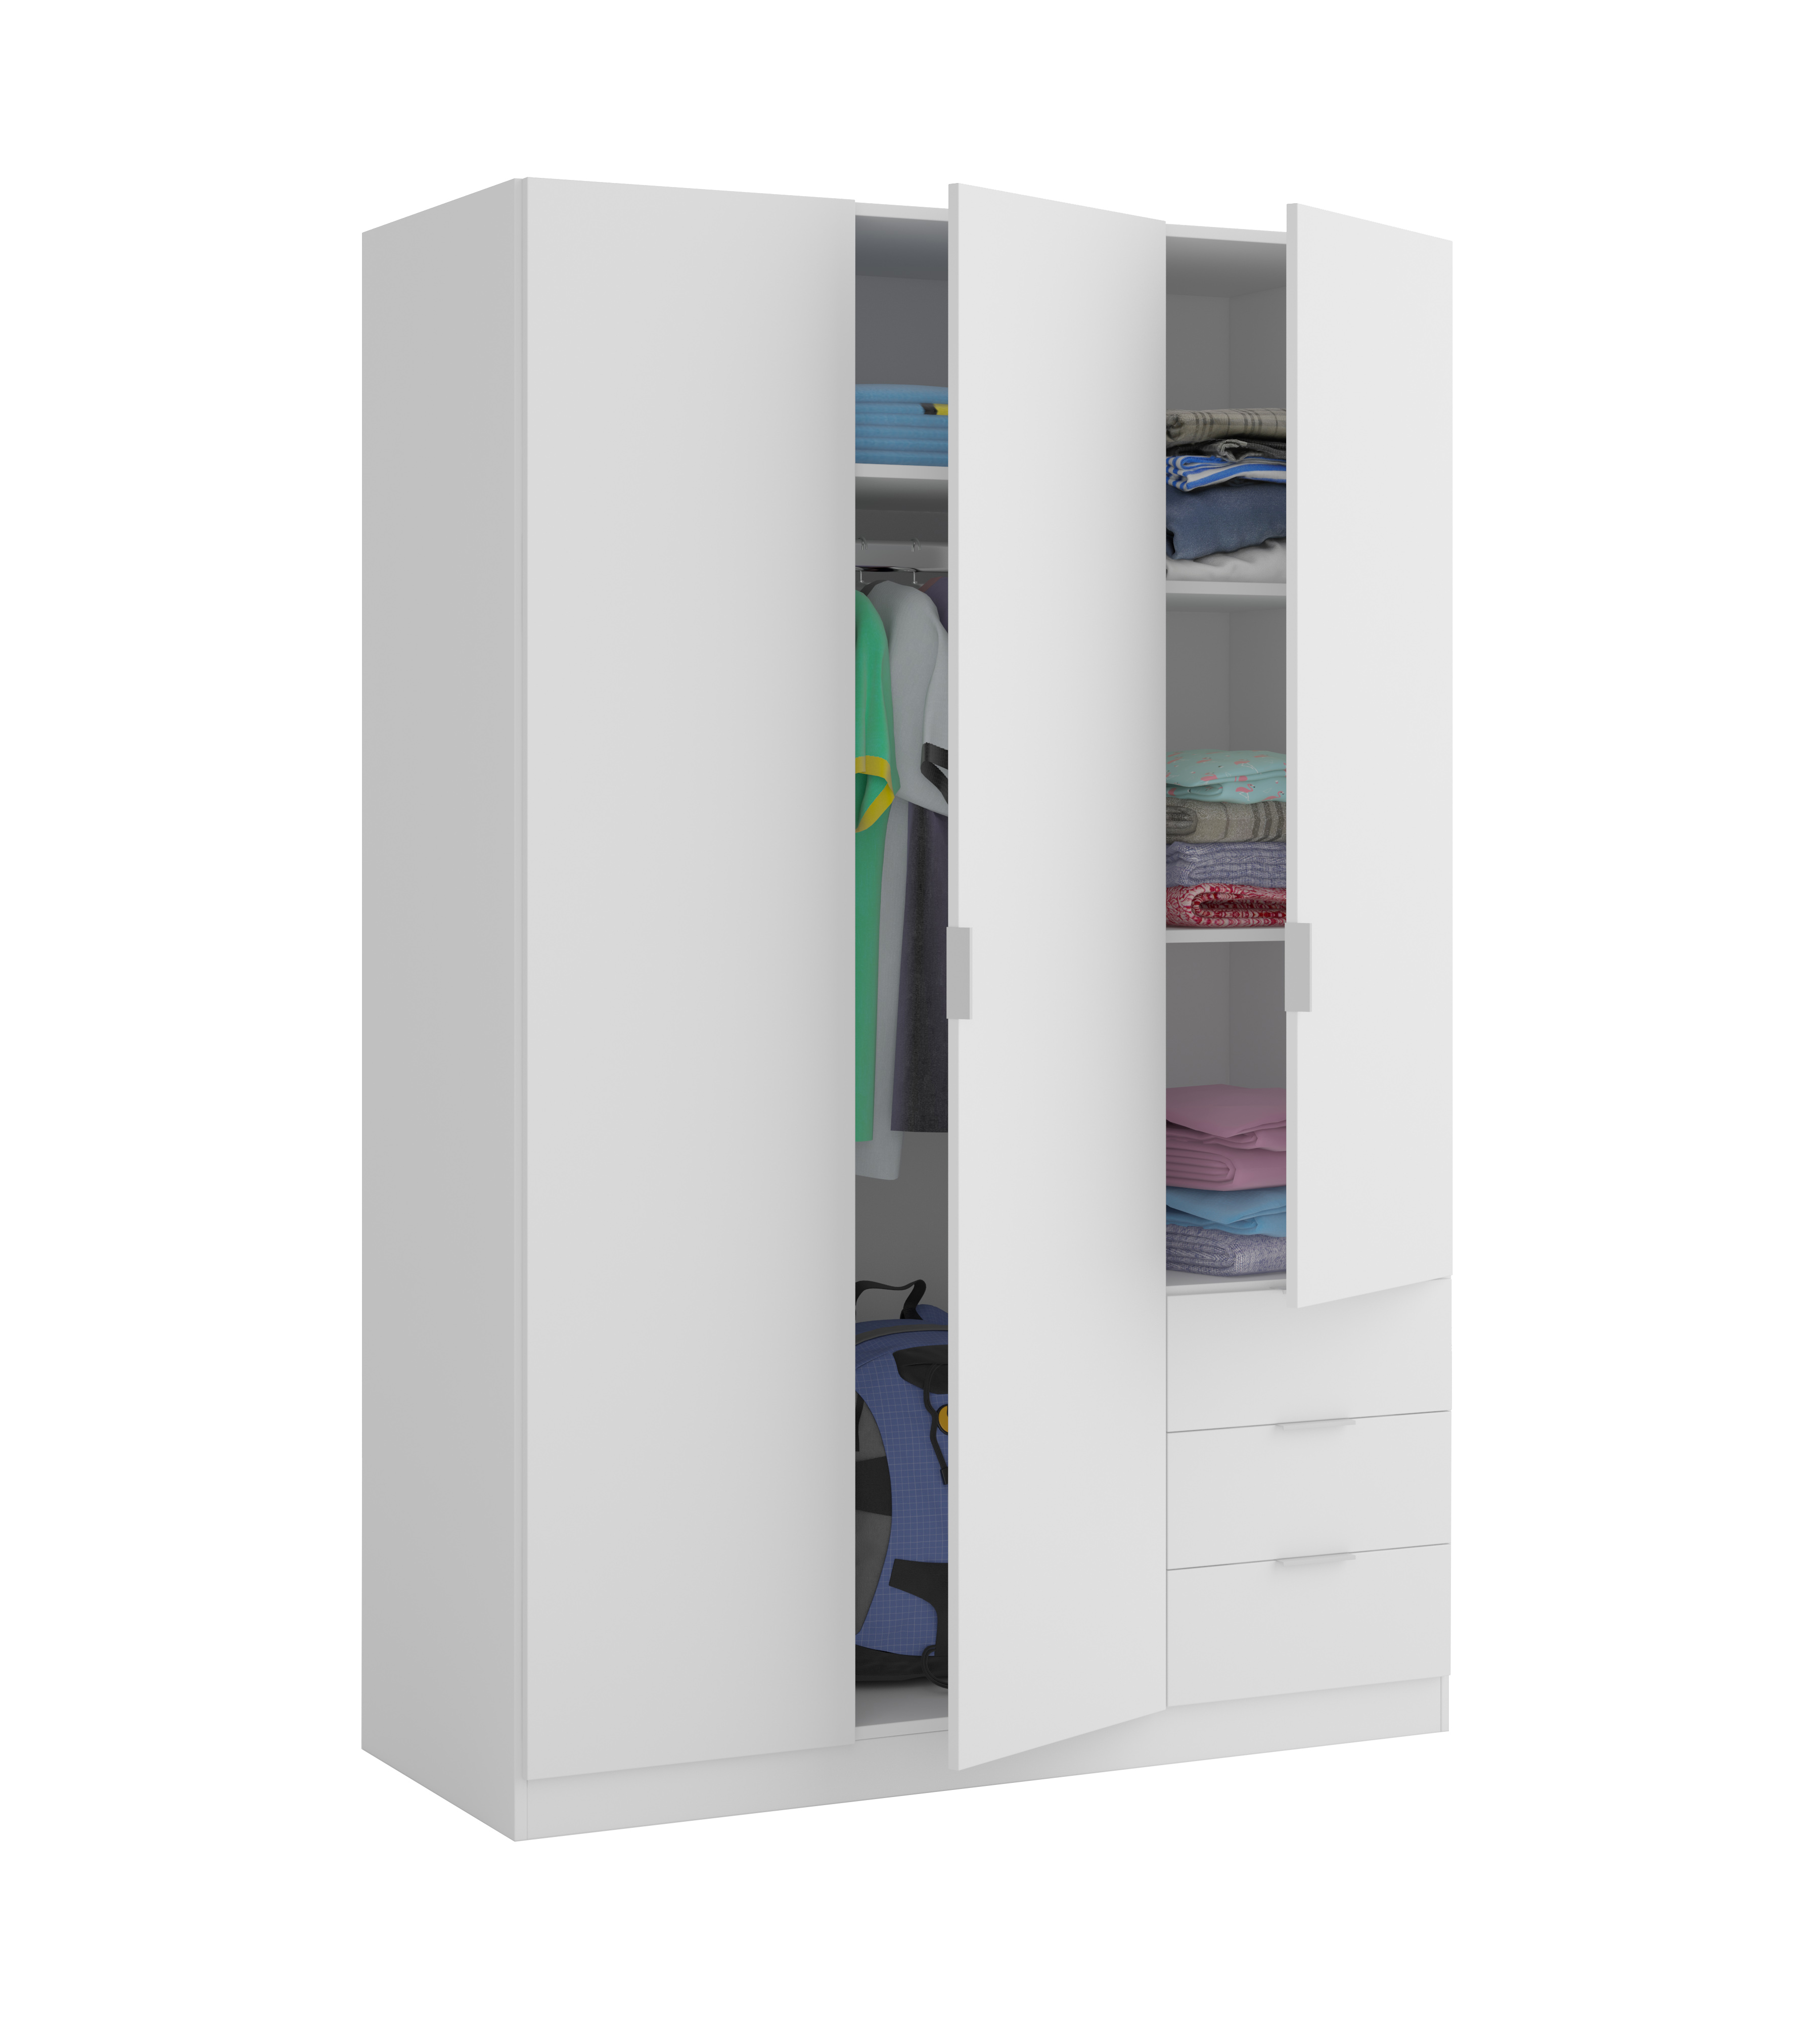 FORES LCX3230 WARDROBE 3 DOORS & 3 DRAWERS WHITE 180X121X52CM